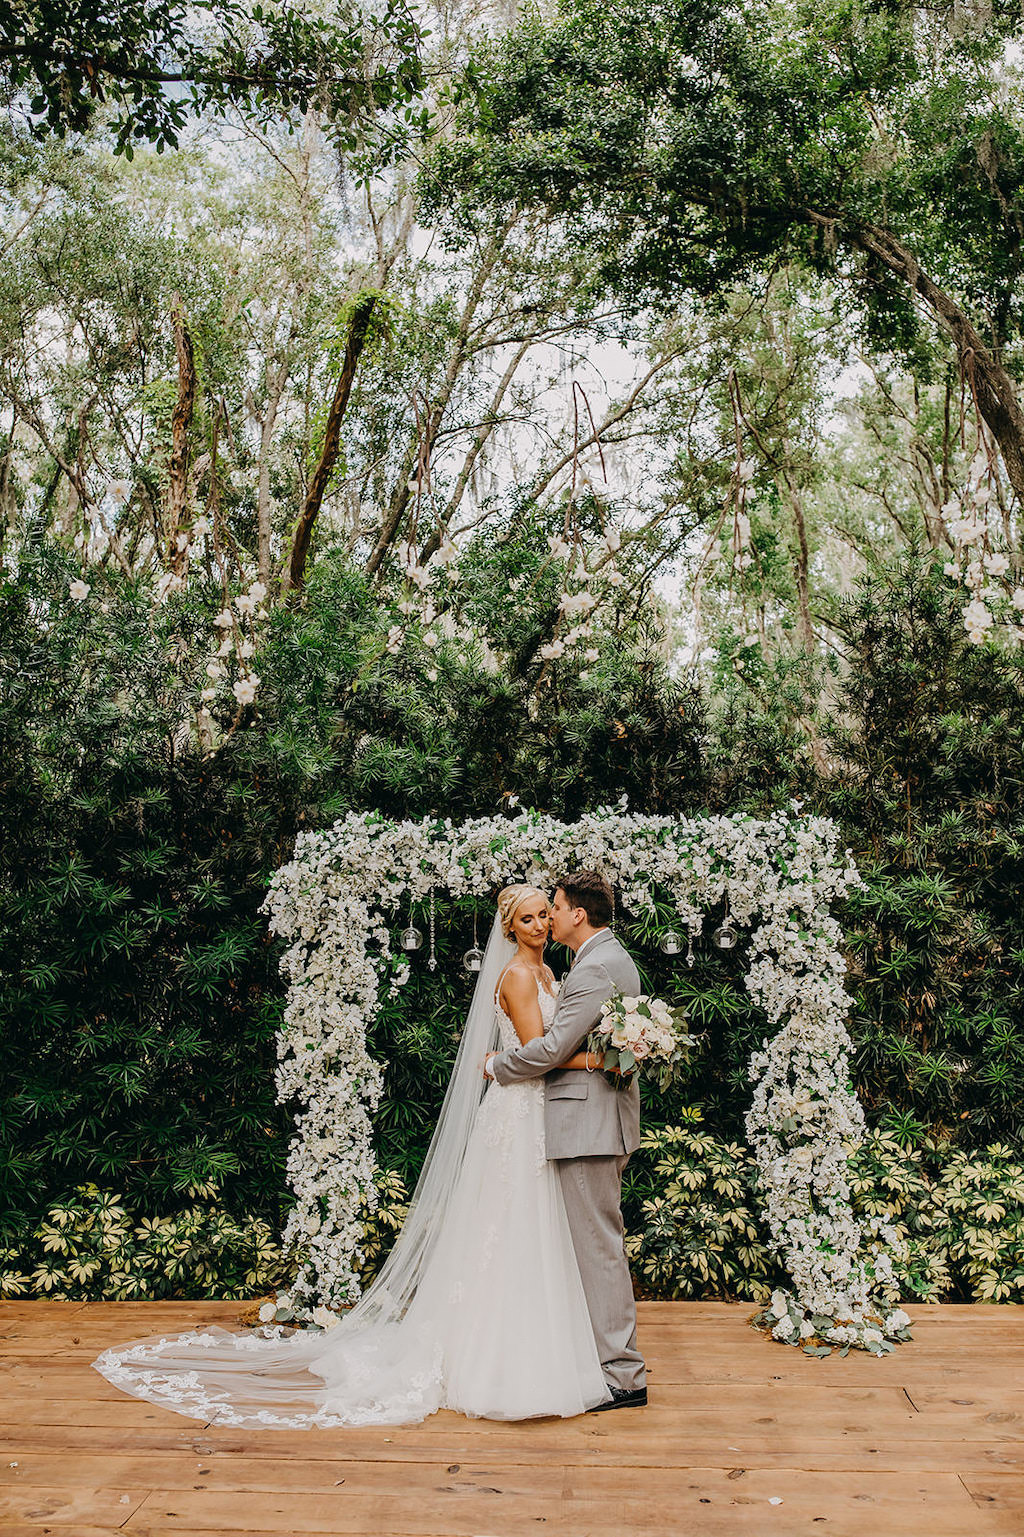 Florida Bride and Groom Wedding Portrait at Outdoor Rustic Inspired Wedding, White and Greenery Floral Arch with Hanging Glass Bulbs | Lakeland Rustic Wedding Venue The Prairie Glenn Barn at Gable Oaks Ranch